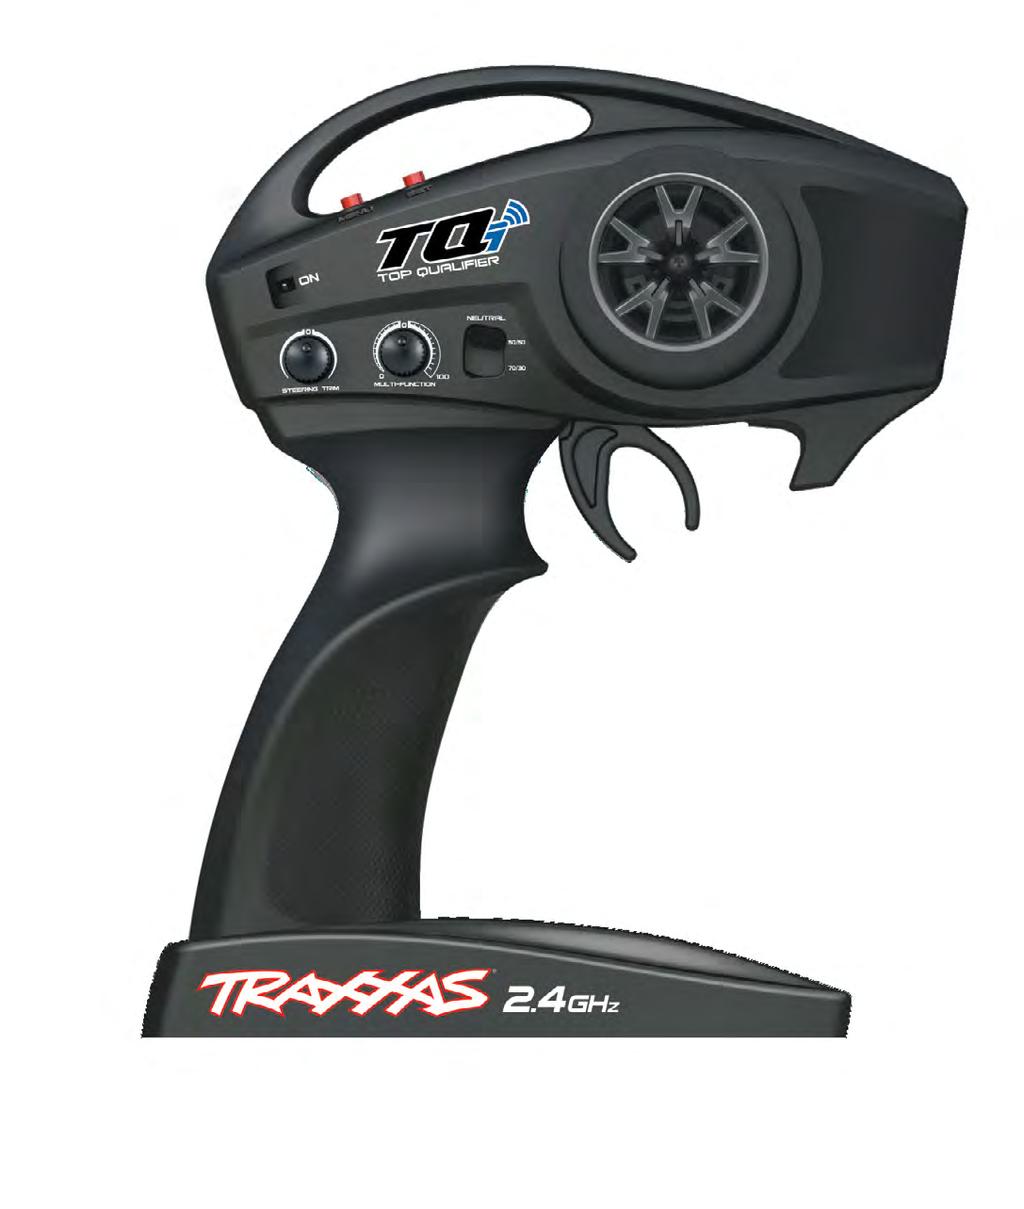 TRAXXAS TQi RADIO & VELINEON POWER SYSTEM TRAXXAS STABILITY MANAGEMENT (TSM) Traxxas Stability Management or TSM allows you to experience all the speed and acceleration that was engineered into your